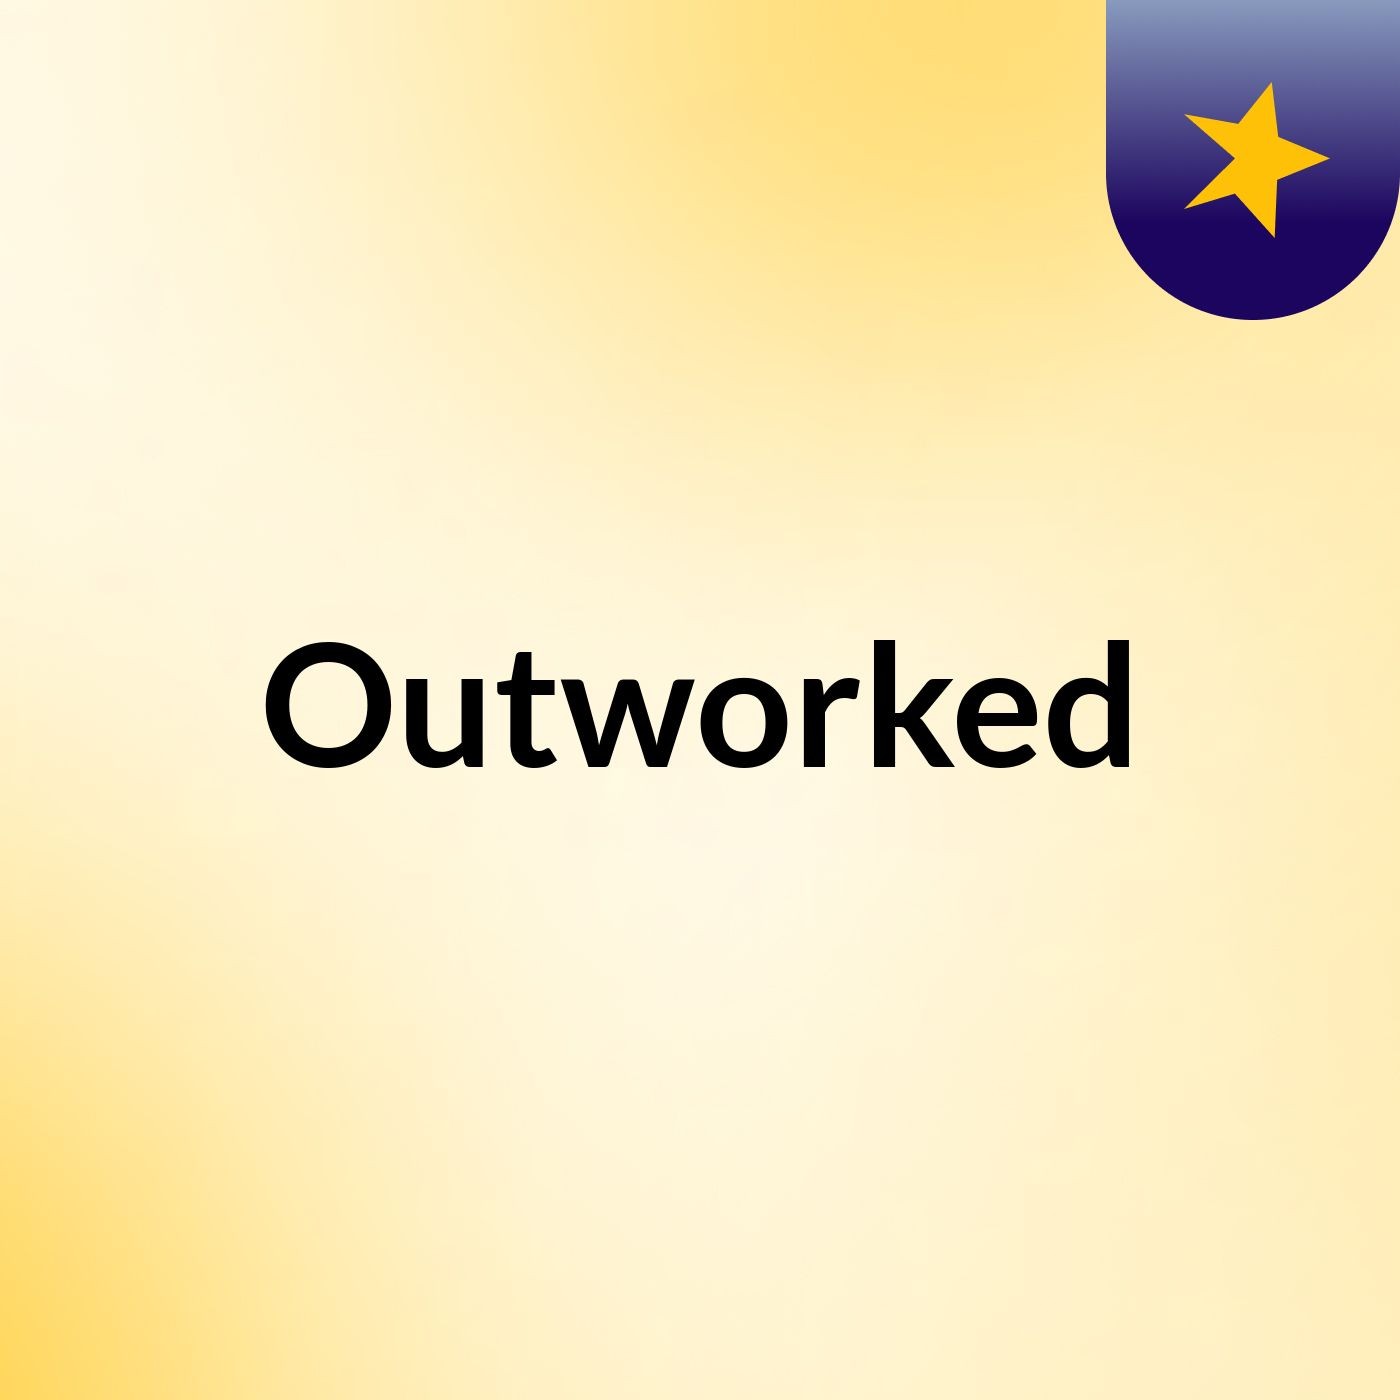 Outworked